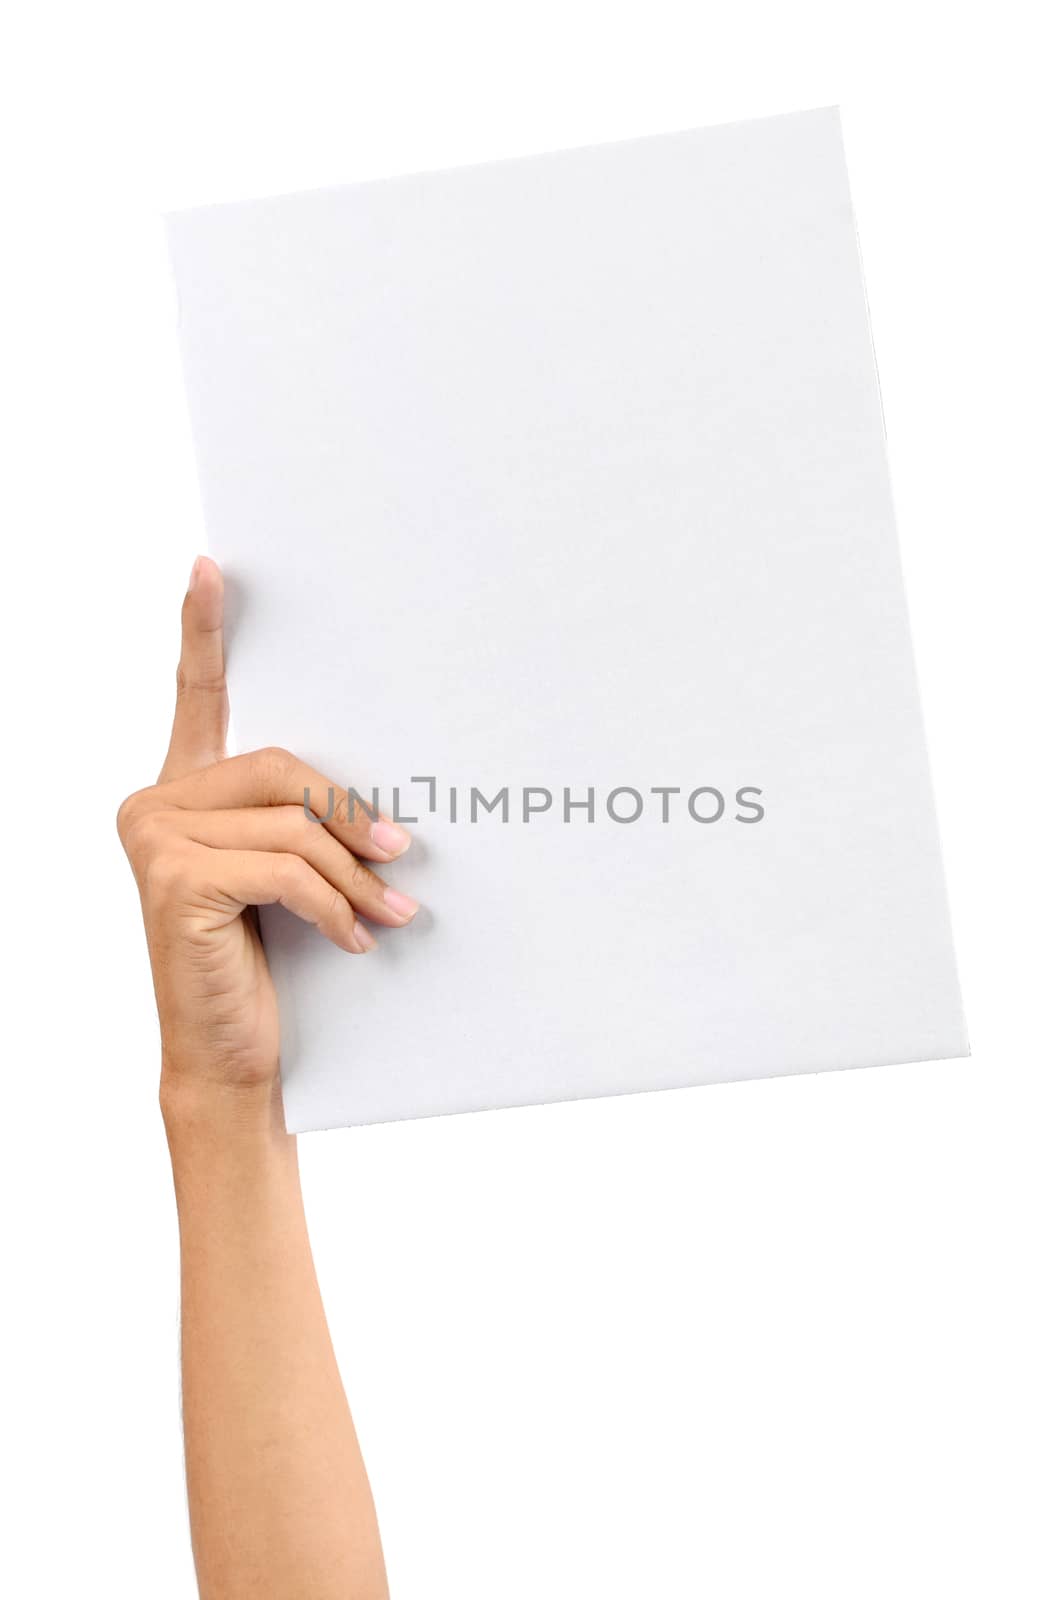 Hand holding white blank paper card, isolated on plain background.